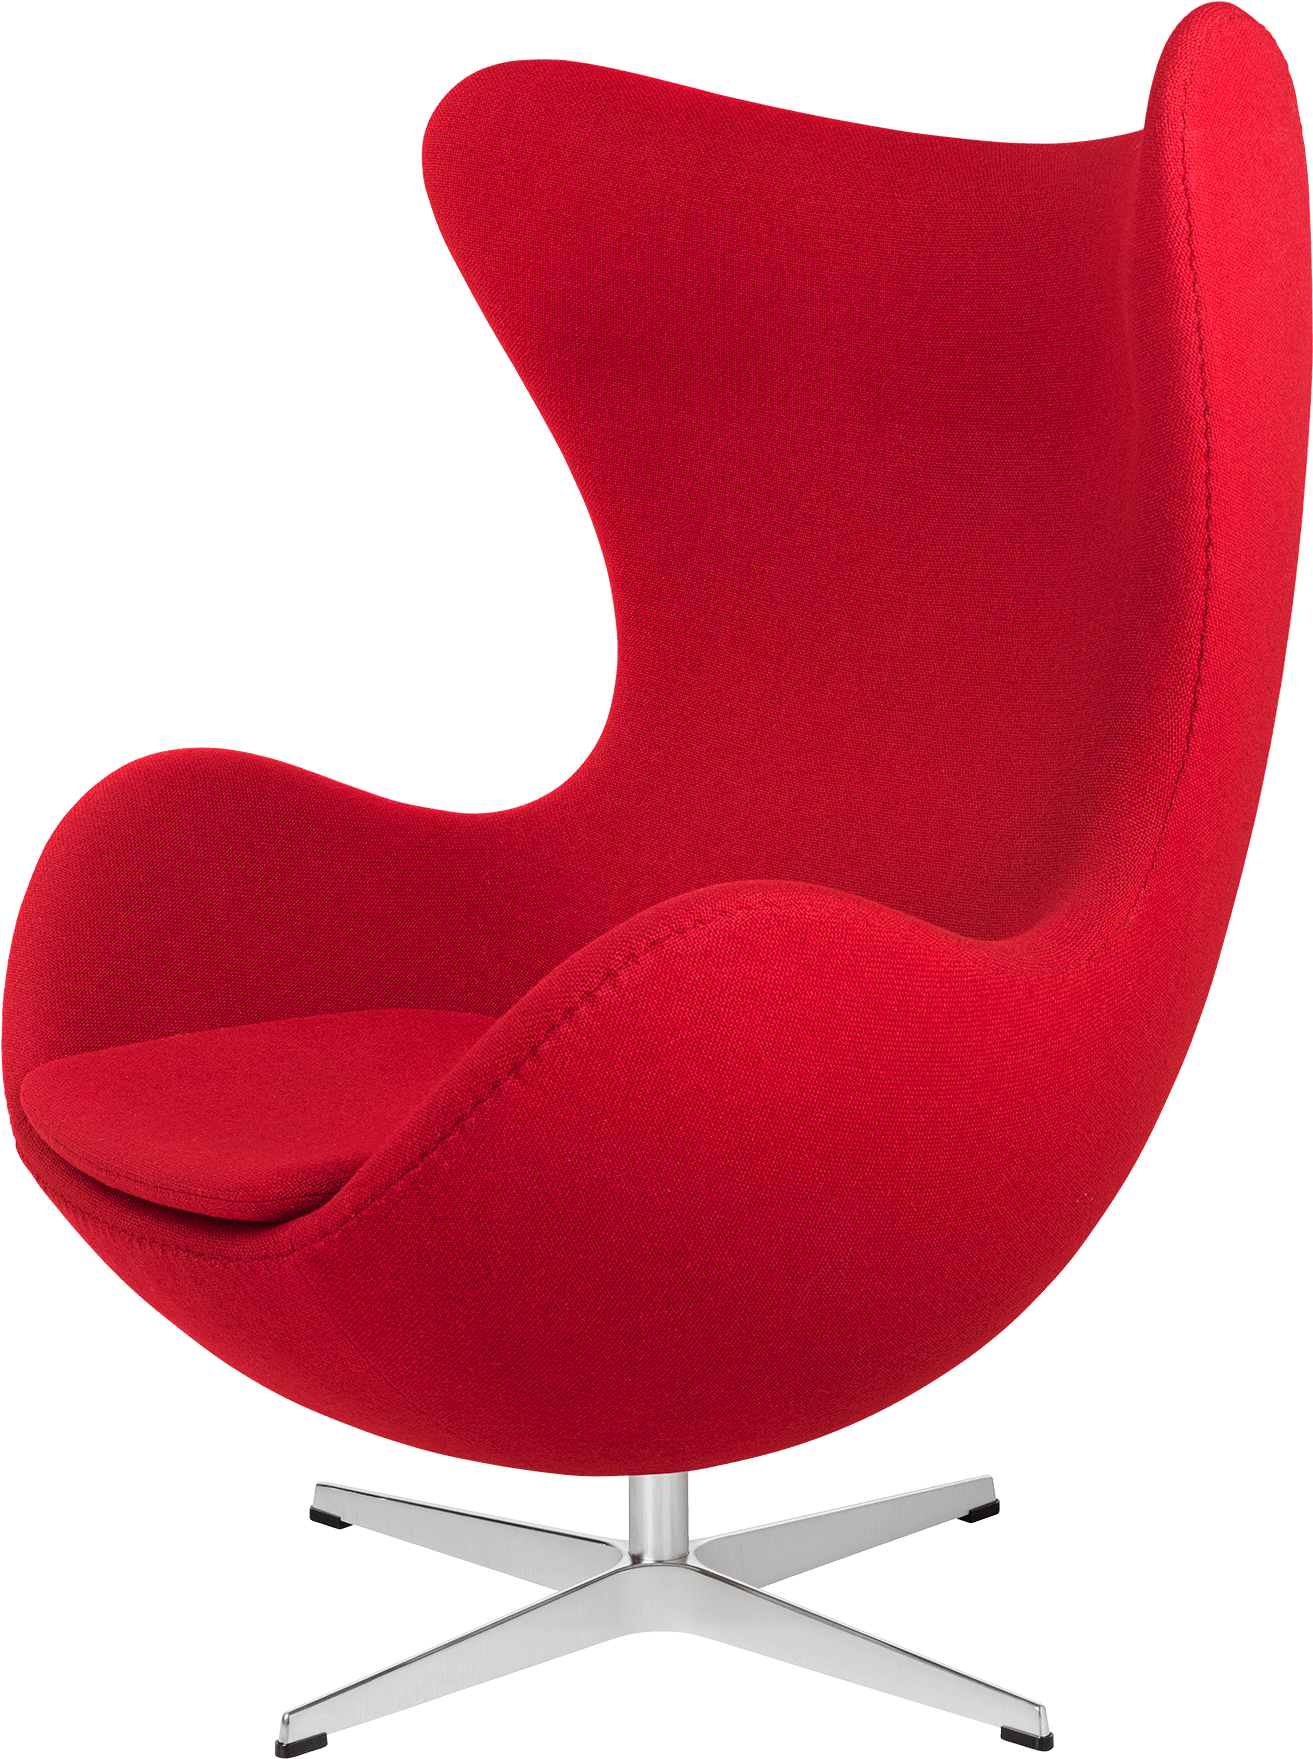 Red Fabric Egg Chair Design PNG